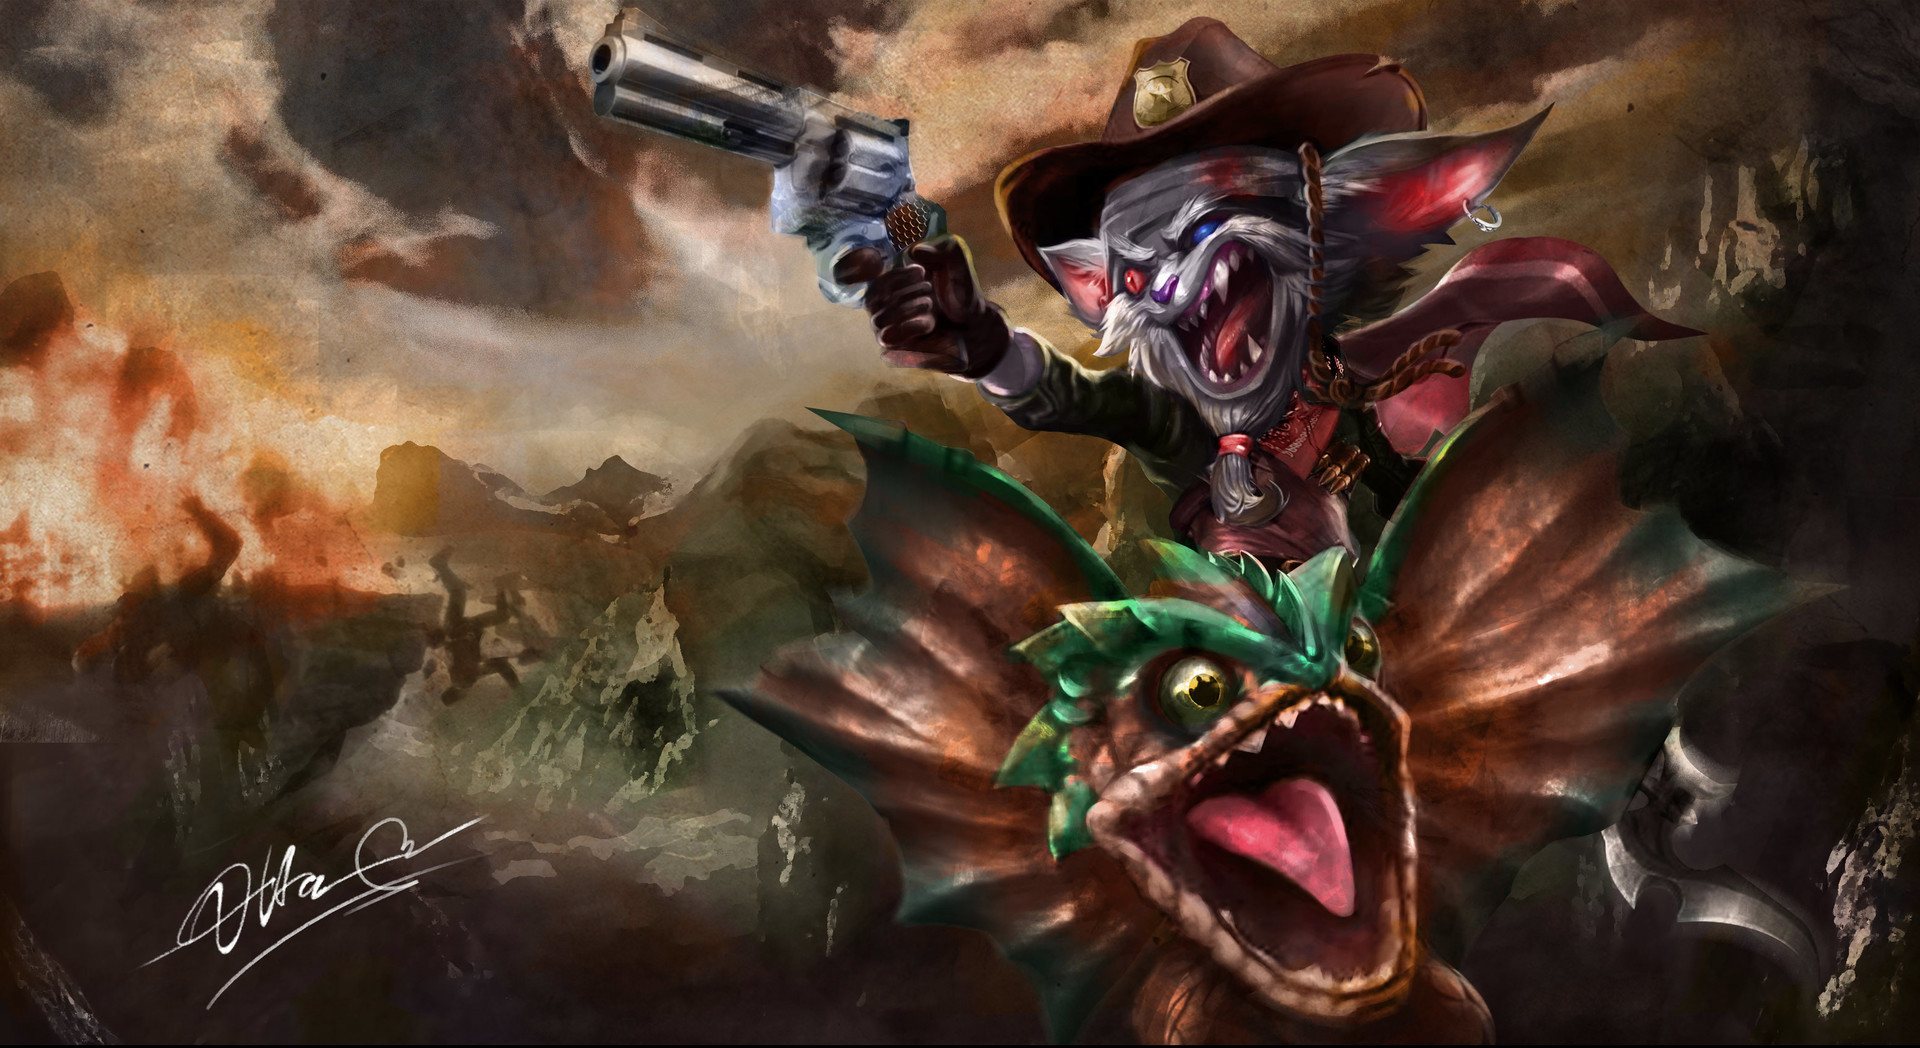 Kled League Of Legends HD Wallpaper And Background